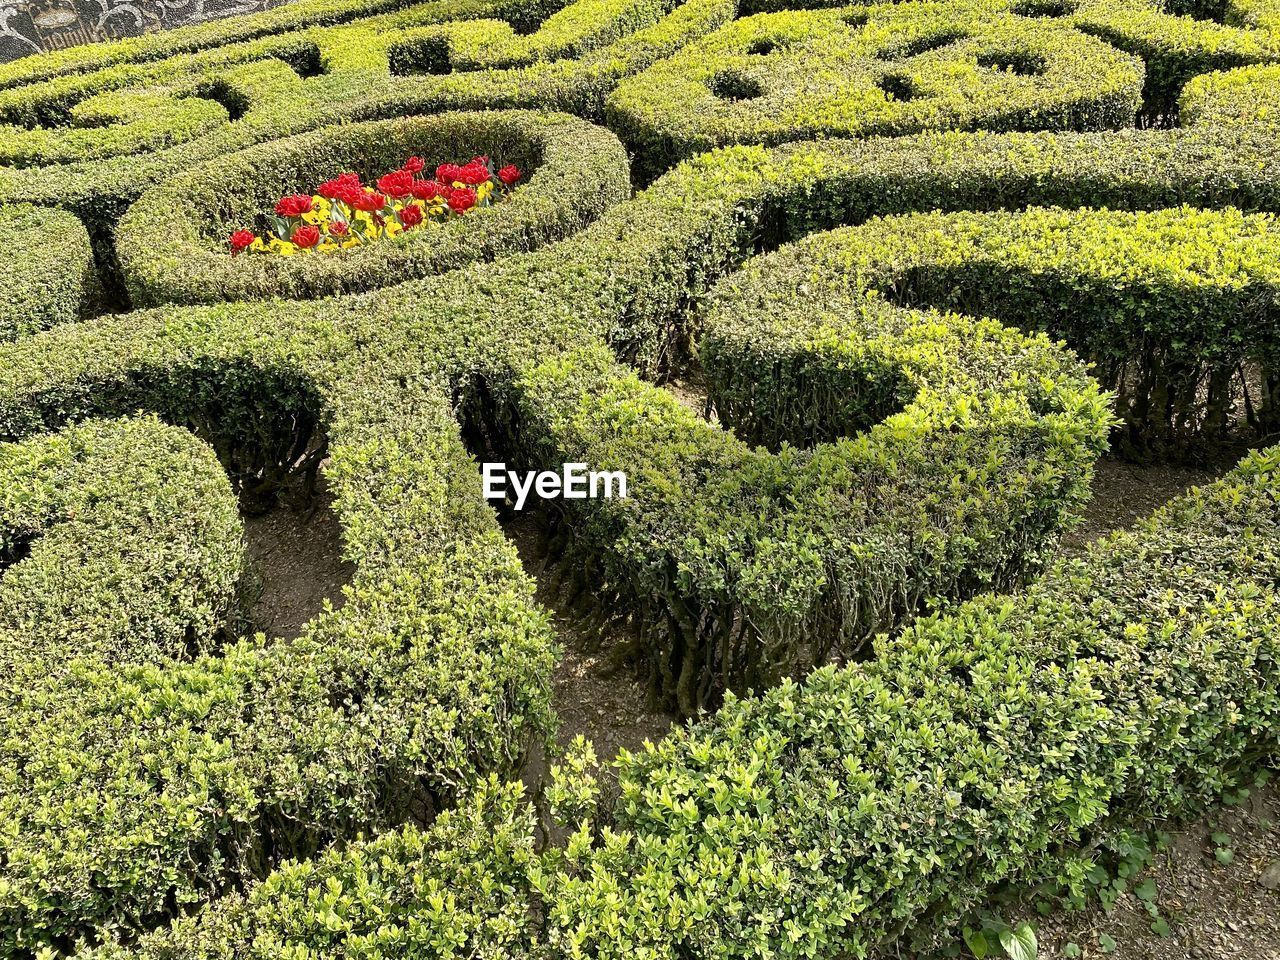 maze, green, plant, labyrinth, growth, flower, nature, no people, shrub, beauty in nature, day, high angle view, lawn, hedge, garden, grass, outdoors, formal garden, soil, land, plantation, pattern, tranquility, field